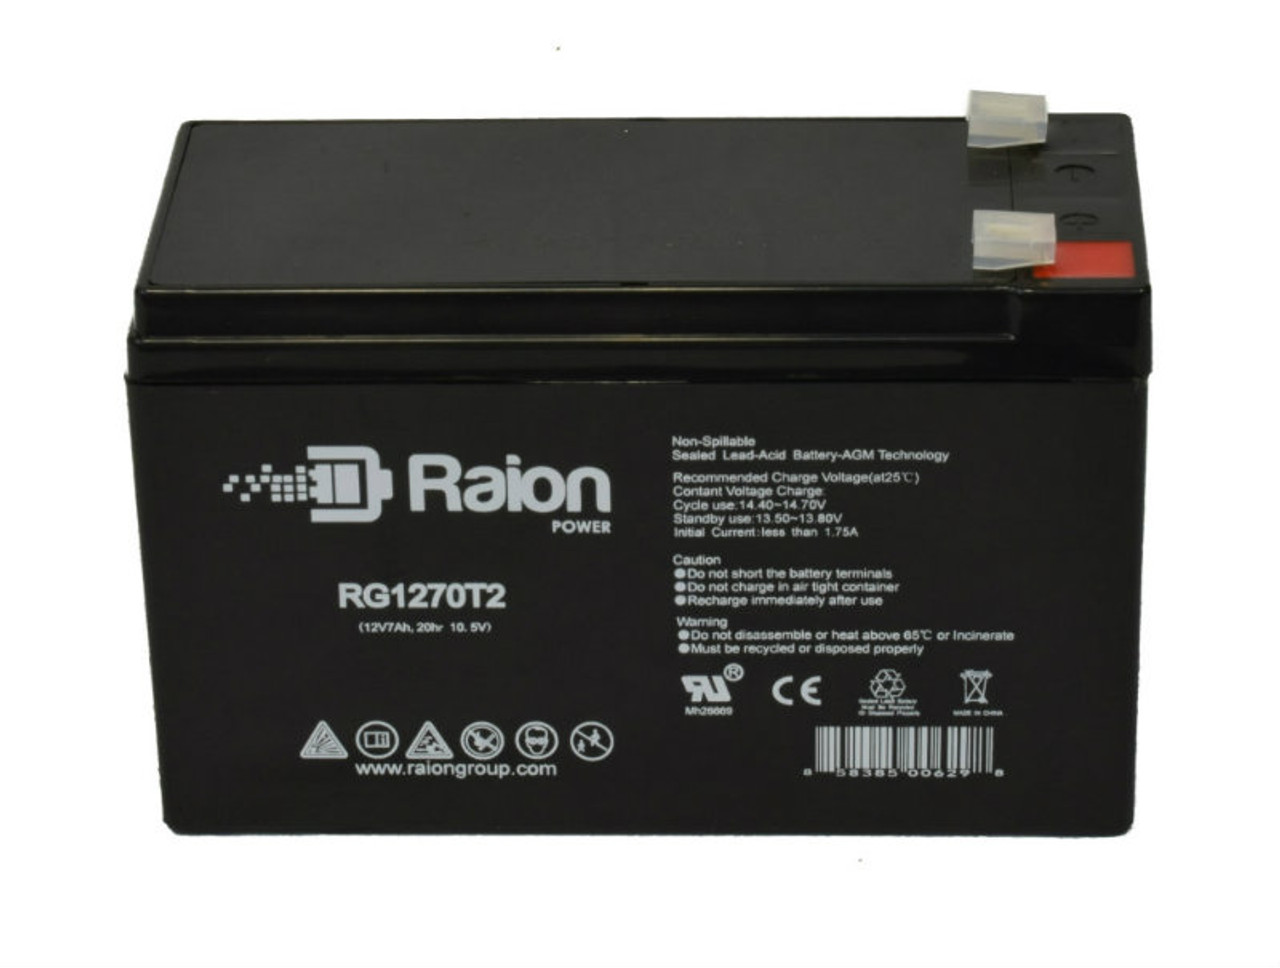 Raion Power RG1270T1 12V 7Ah Lead Acid Battery for North American Drager B Anesthesia Machine